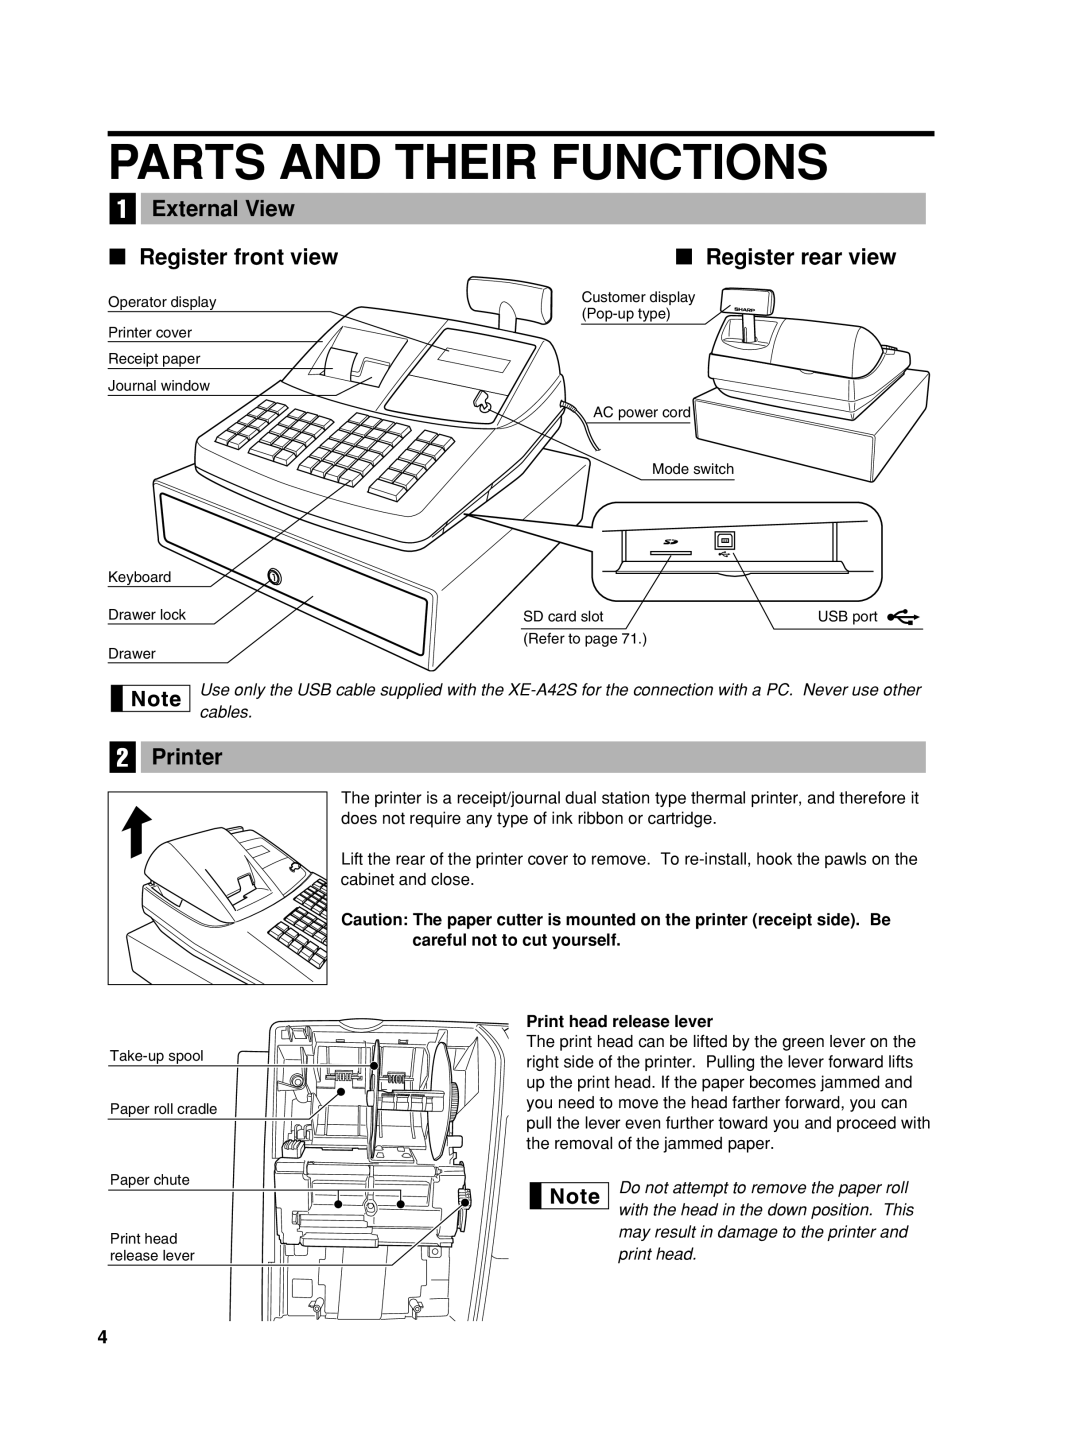 Sharp XE-A42S instruction manual Parts And Their Functions, External View, Register front view, Register rear view, Printer 